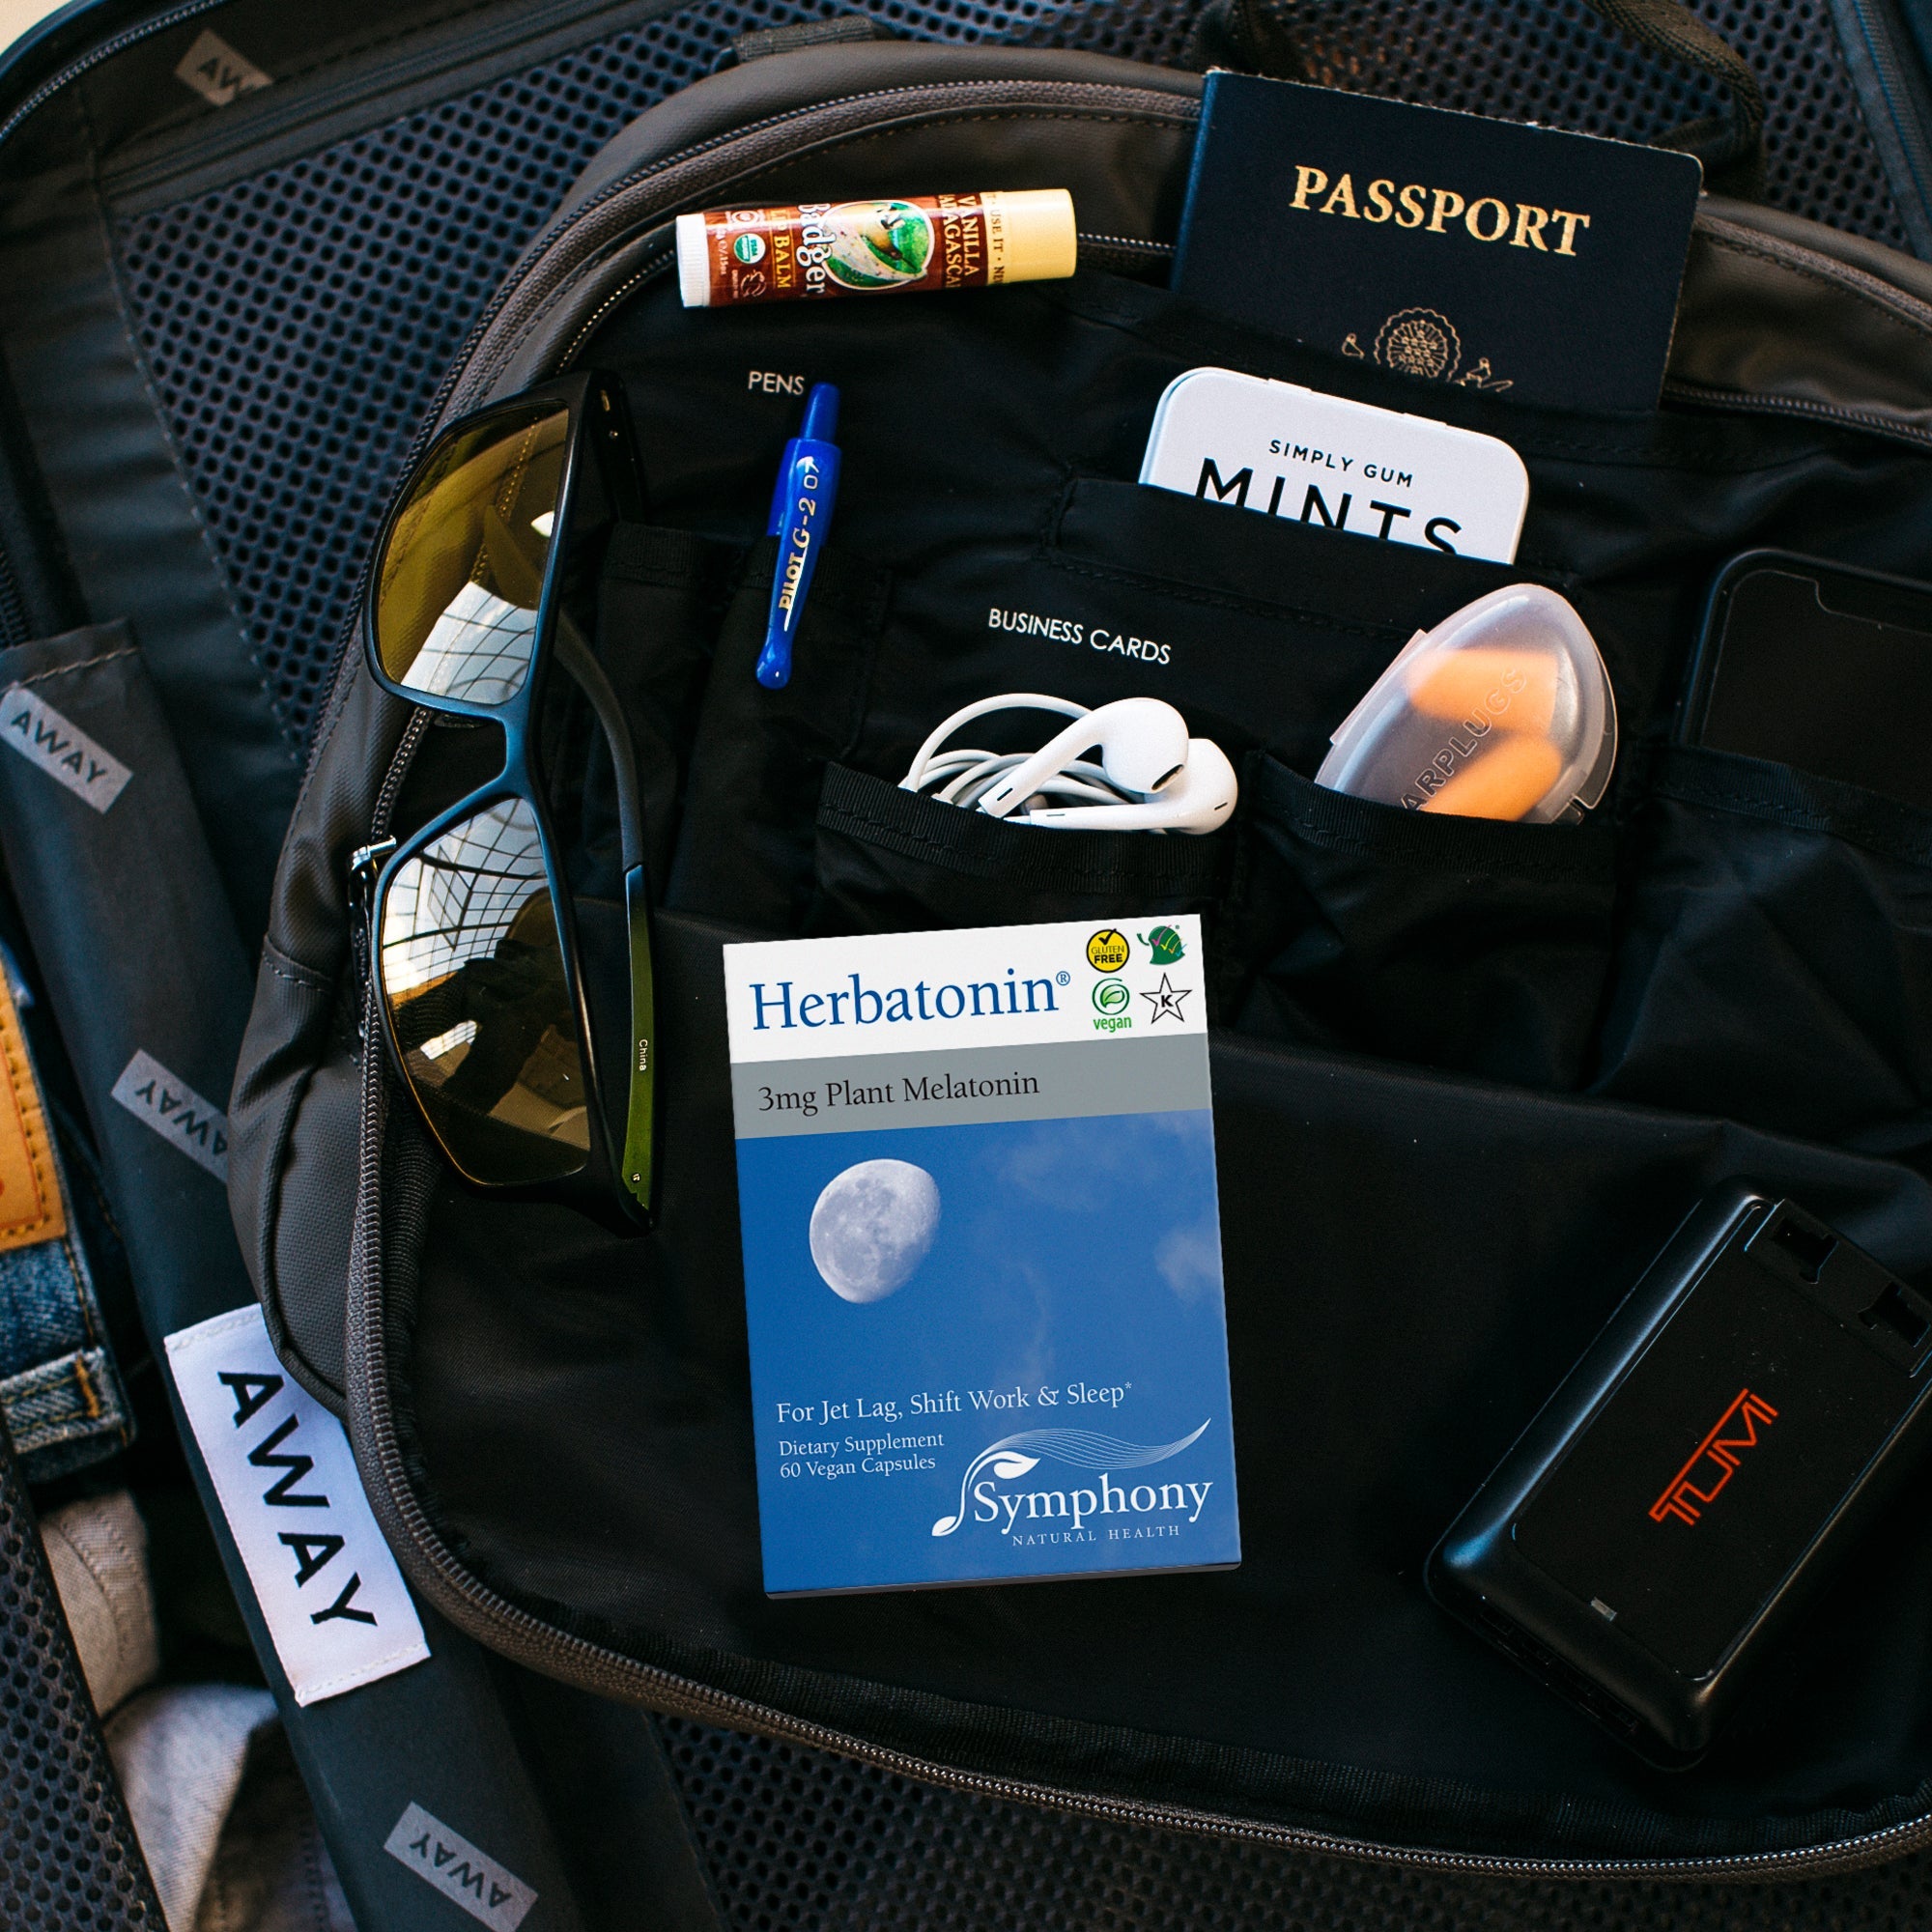 Away-brand black suitcase opened with contents of sunglasses, mints tin, passport book, lip balm, ear pods, orange ear plugs, spa wipes, Femmenessence MacaHarmony box, and Herbatonin Travel Pack box in woman's hand